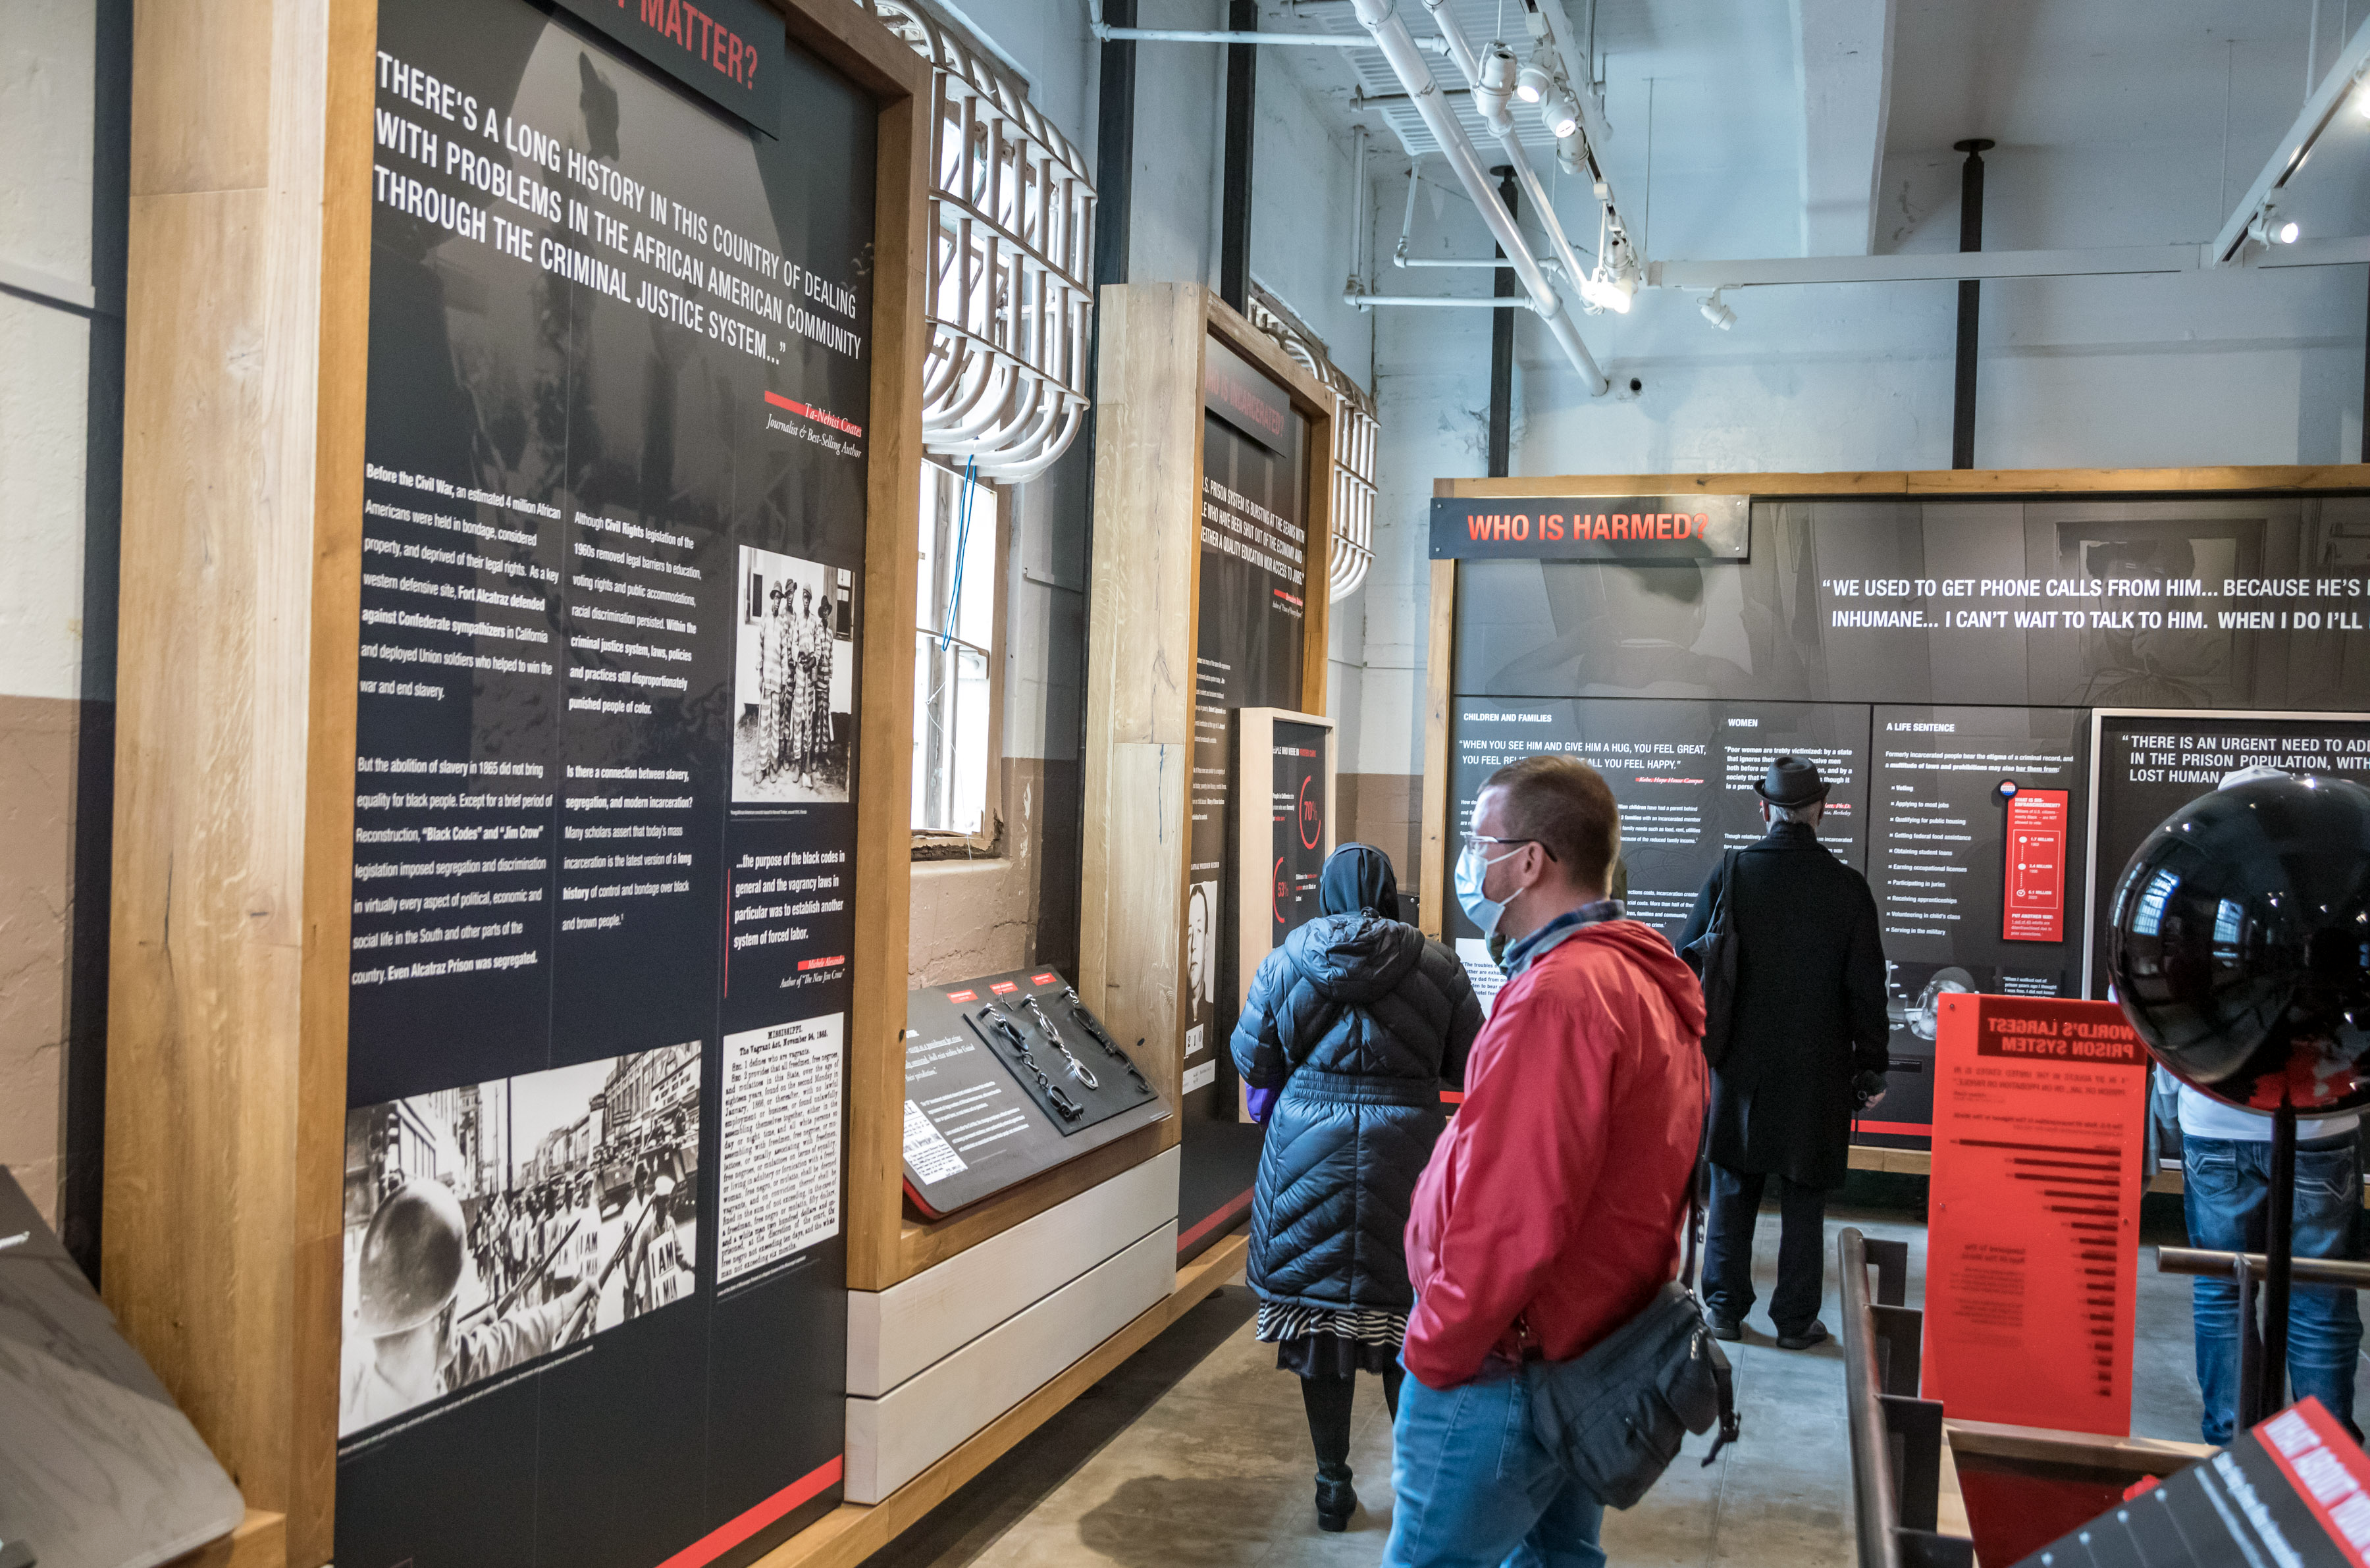 Visitors observe the panels of The Big Lockup: Mass Incarceration in the United States exhibit. The panels include text, images, and quotes from history to who is harmed by mass incarceration.